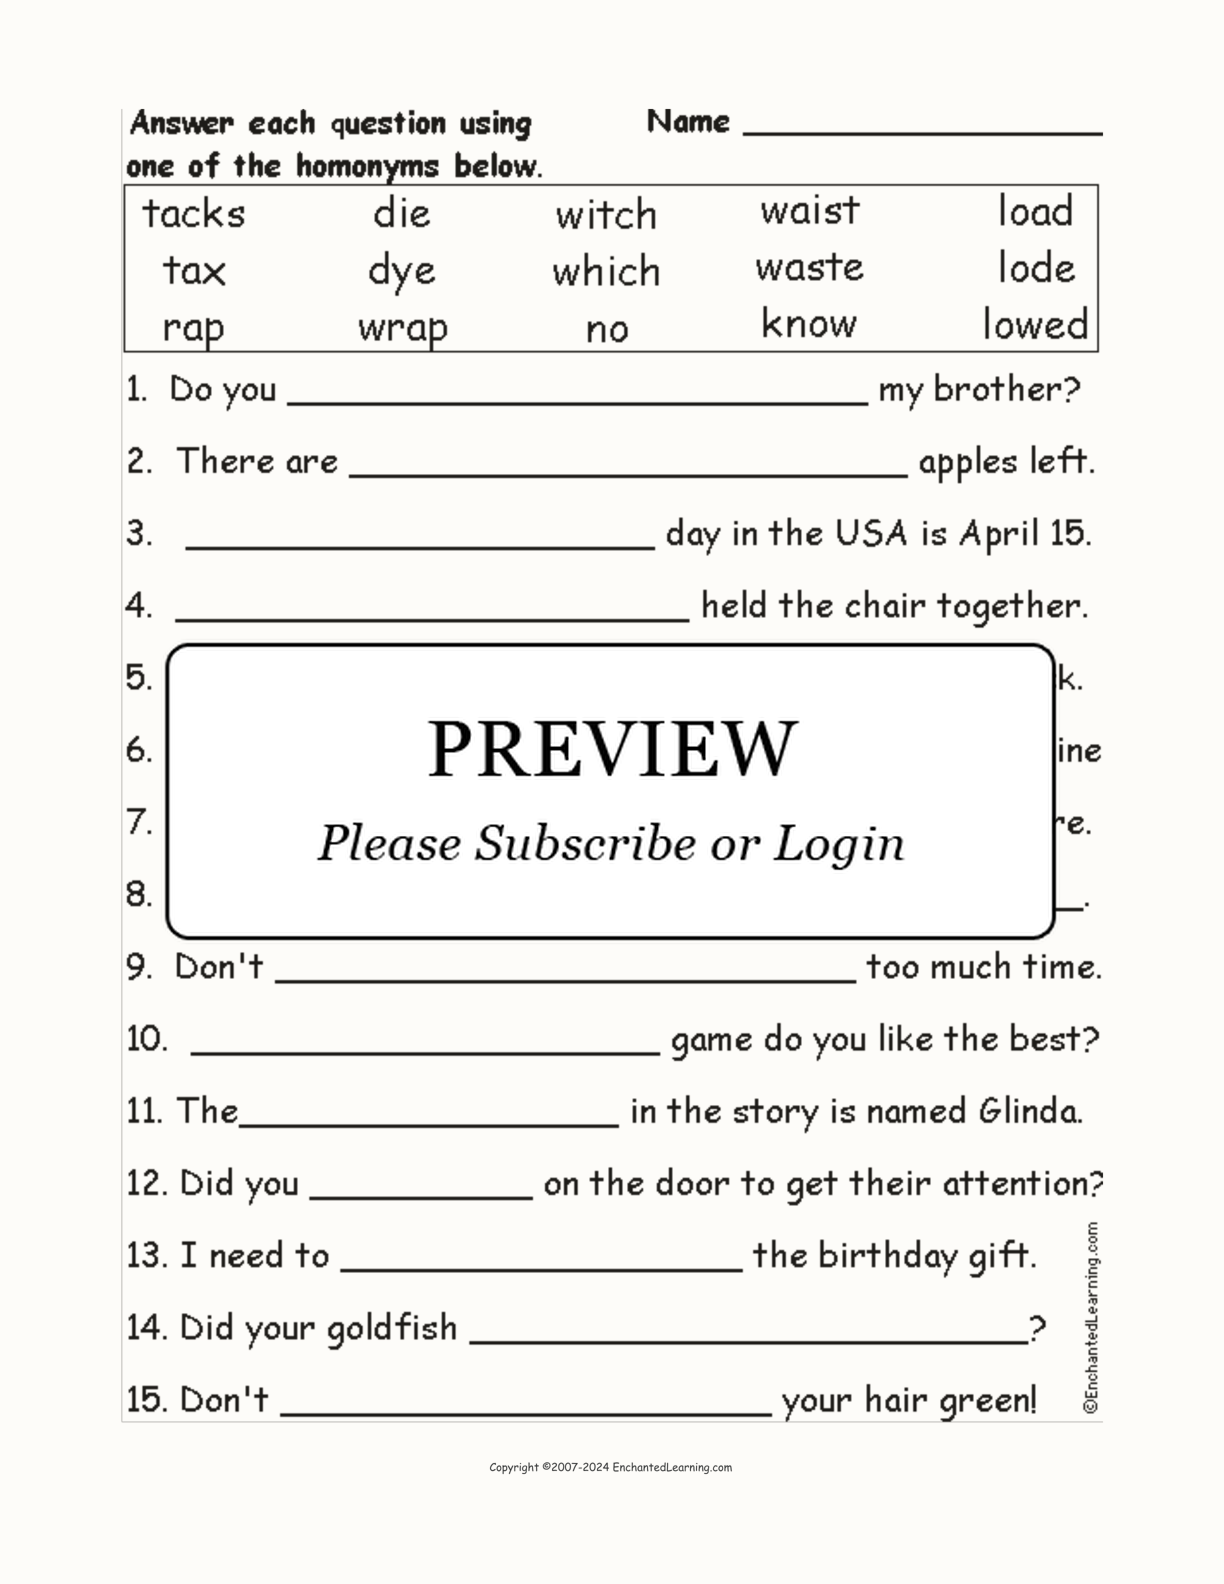 Homonyms Spelling Word Questions #8 interactive worksheet page 1